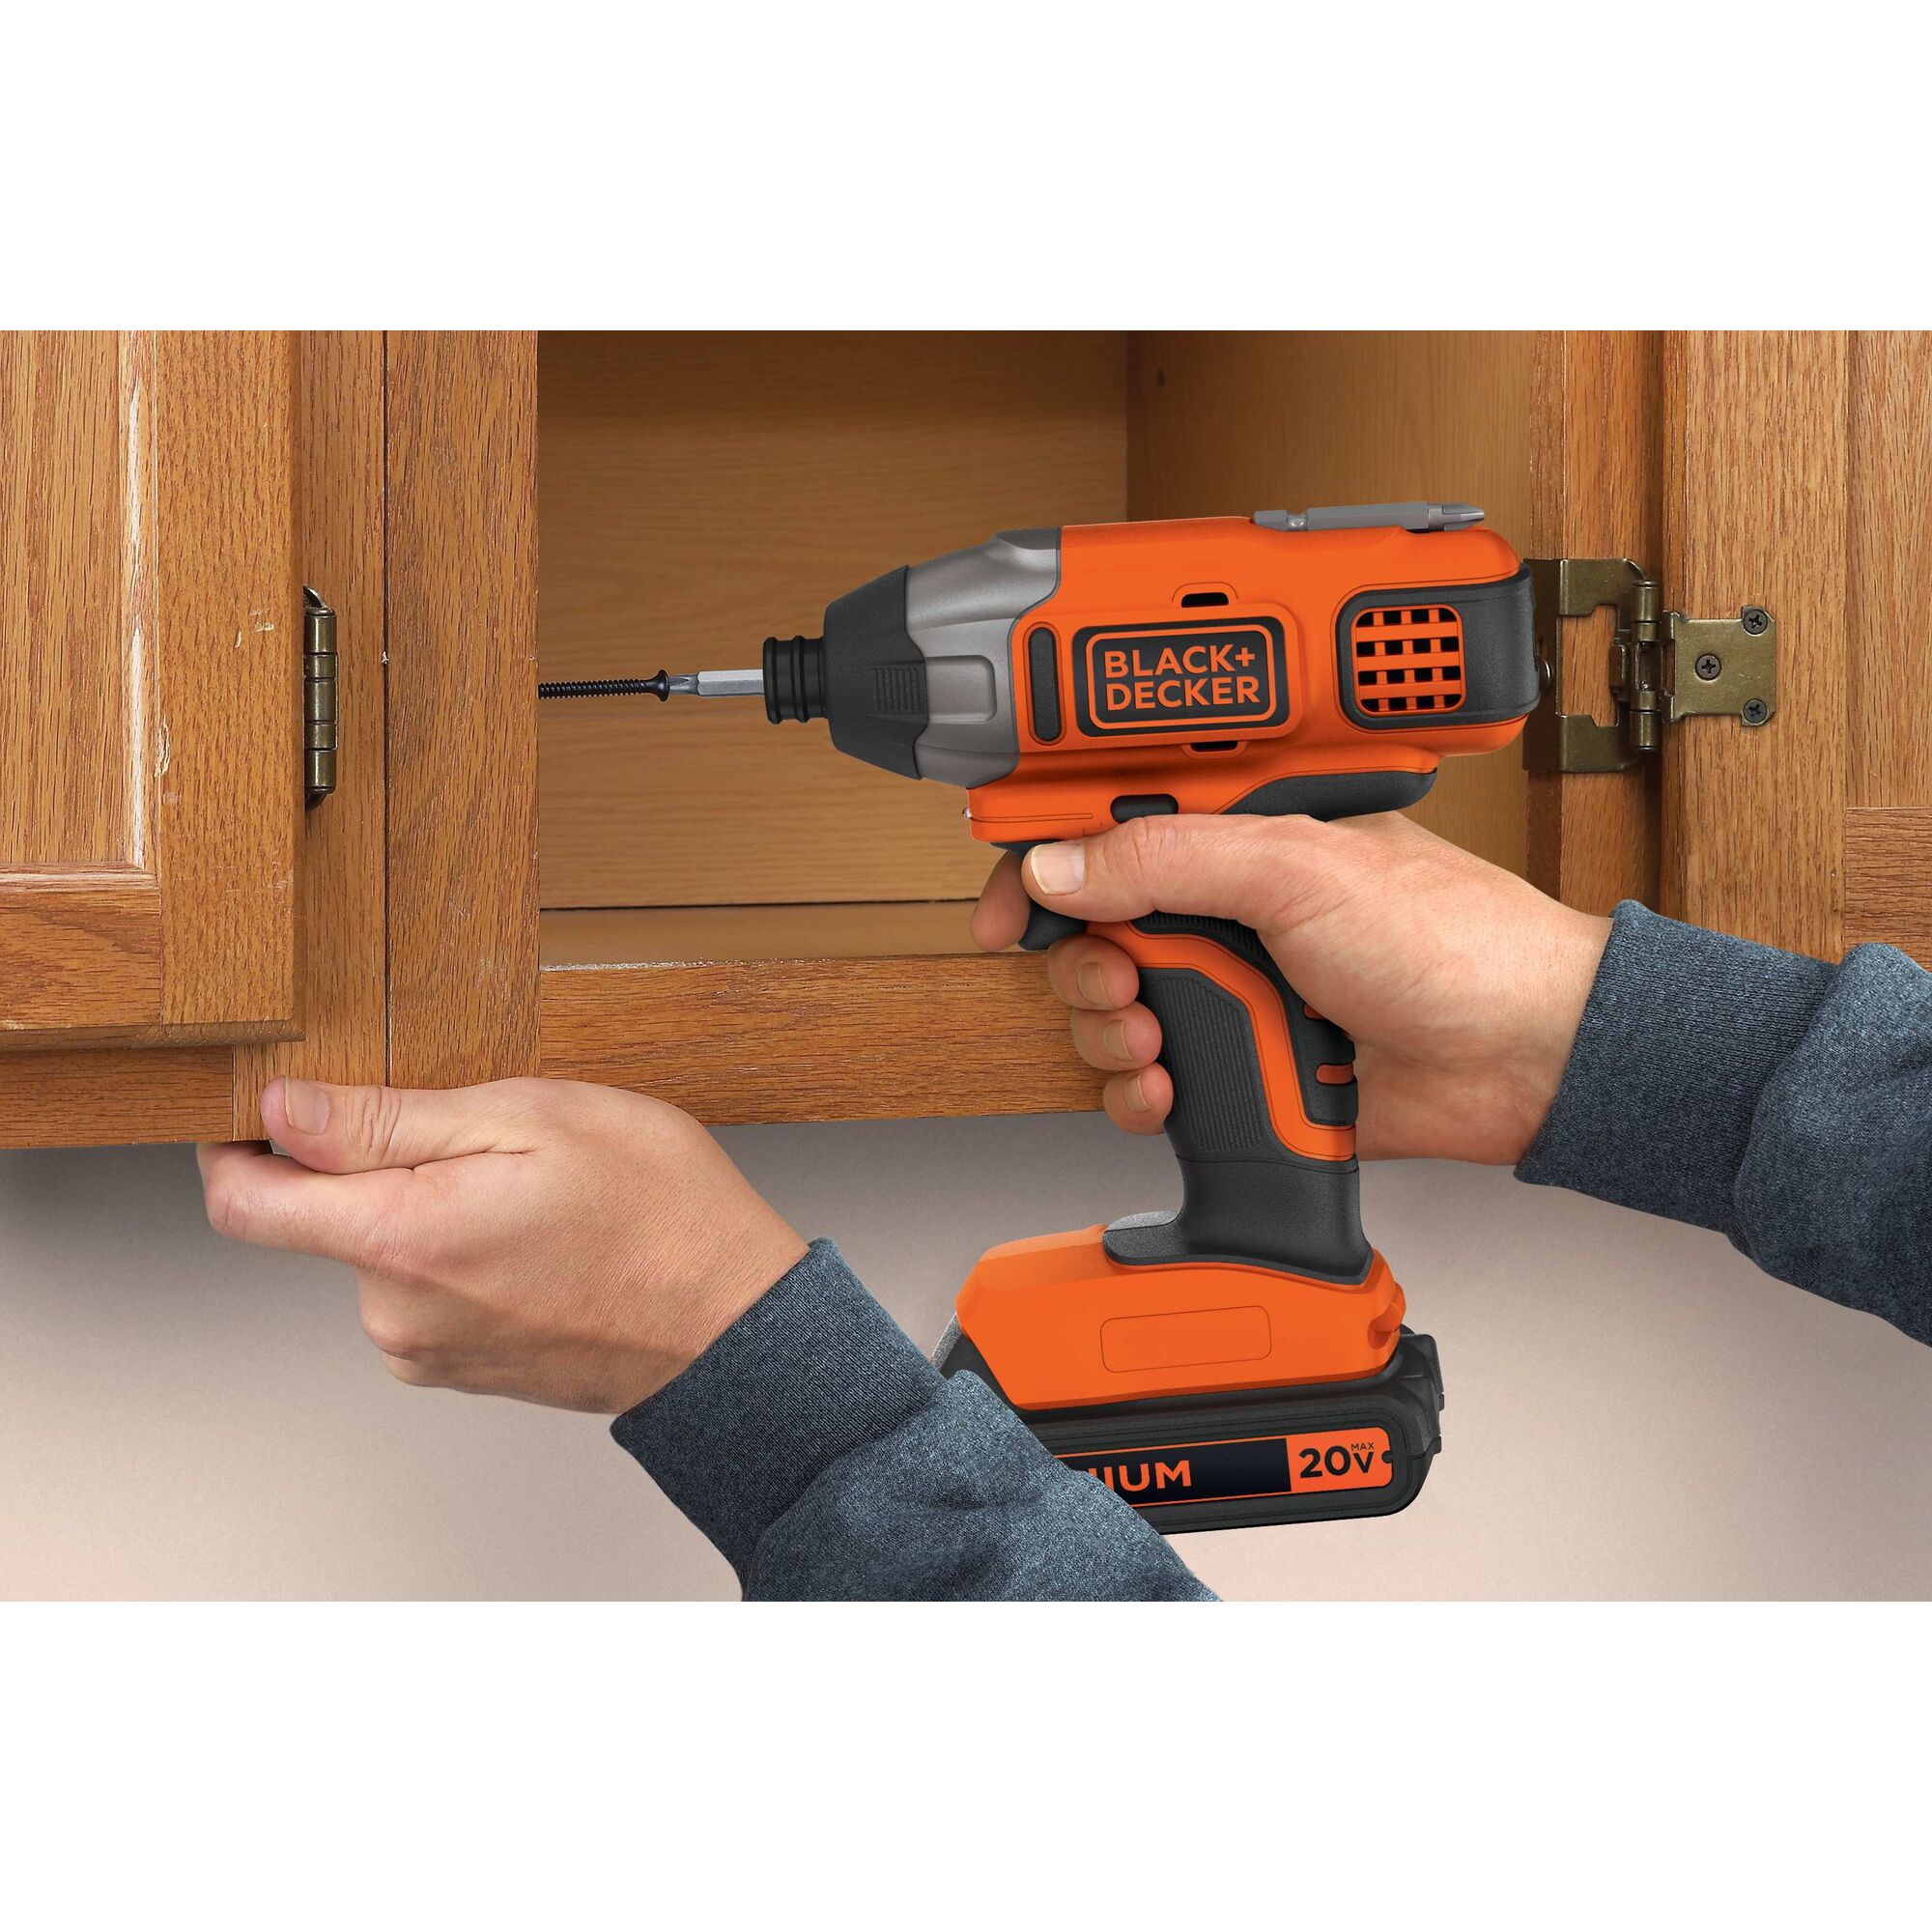 20 volt lithium impact driver being used .